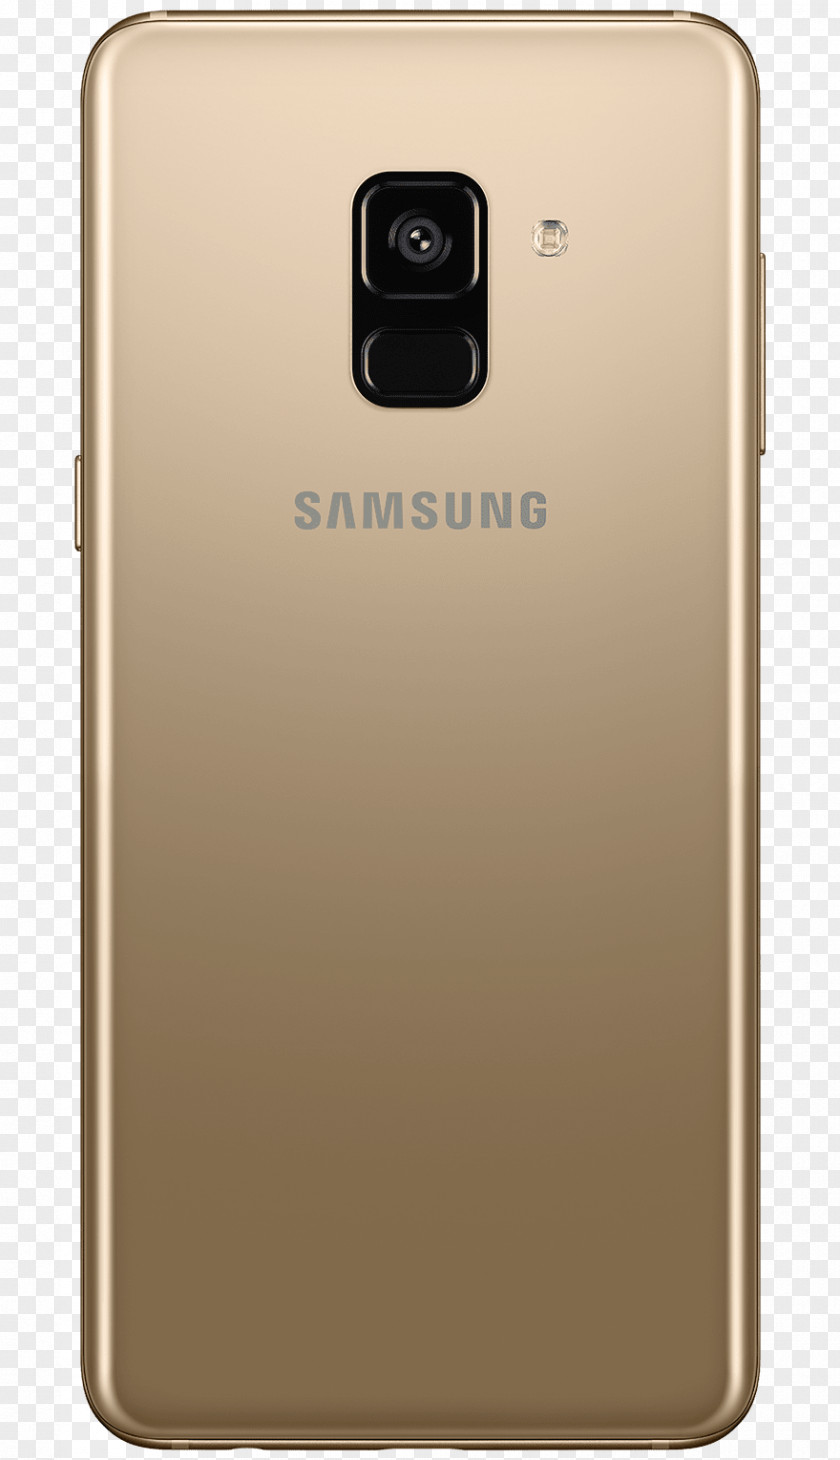 Samsung Galaxy A8 / A8+ Feature Phone Telephone PNG